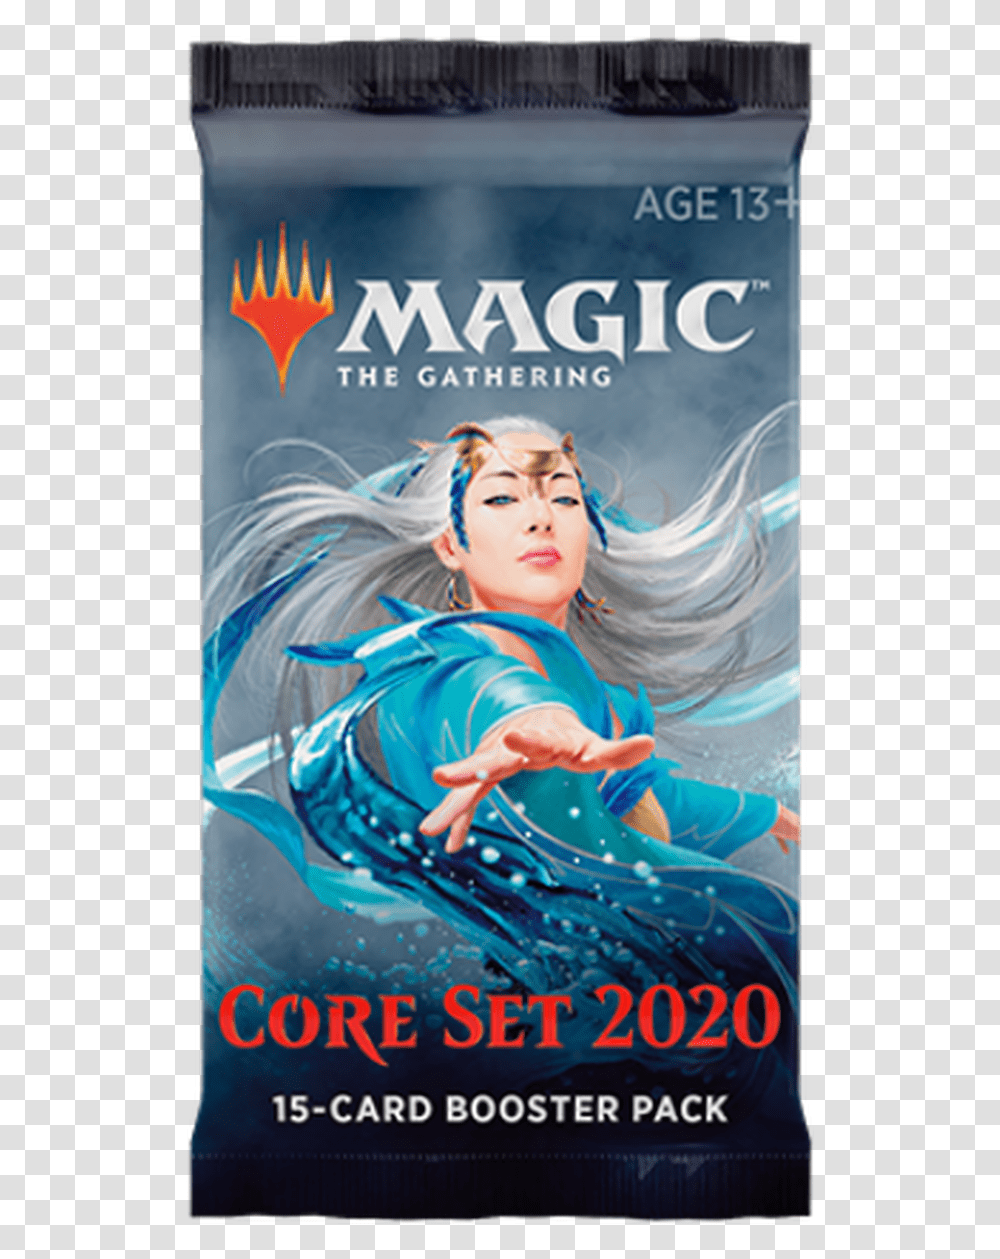 The Gathering Core Set 2020 Pack, Person, Human, Poster, Advertisement Transparent Png